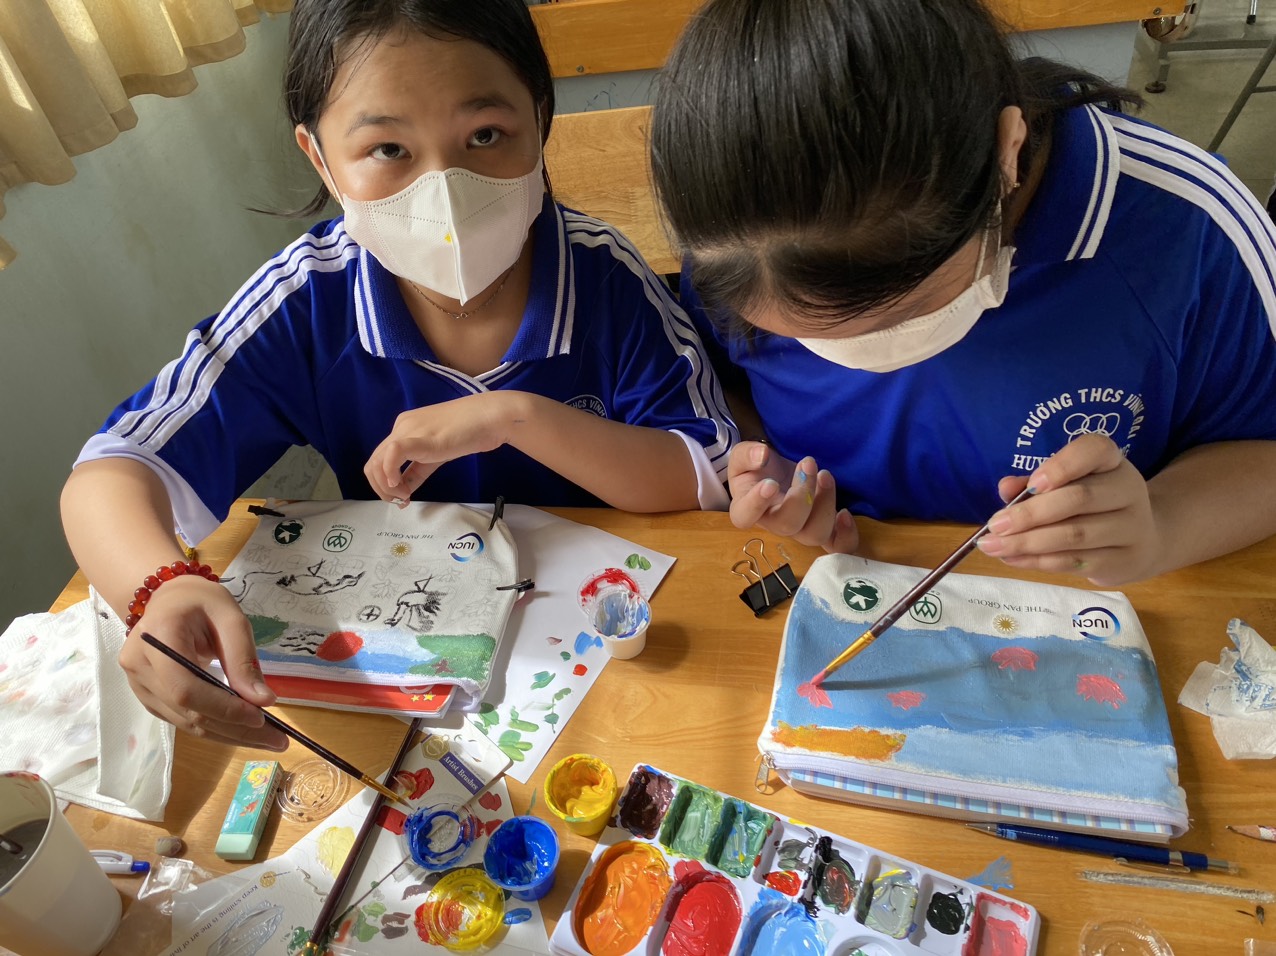 Students in Vinh Dai school were drawing at the contest